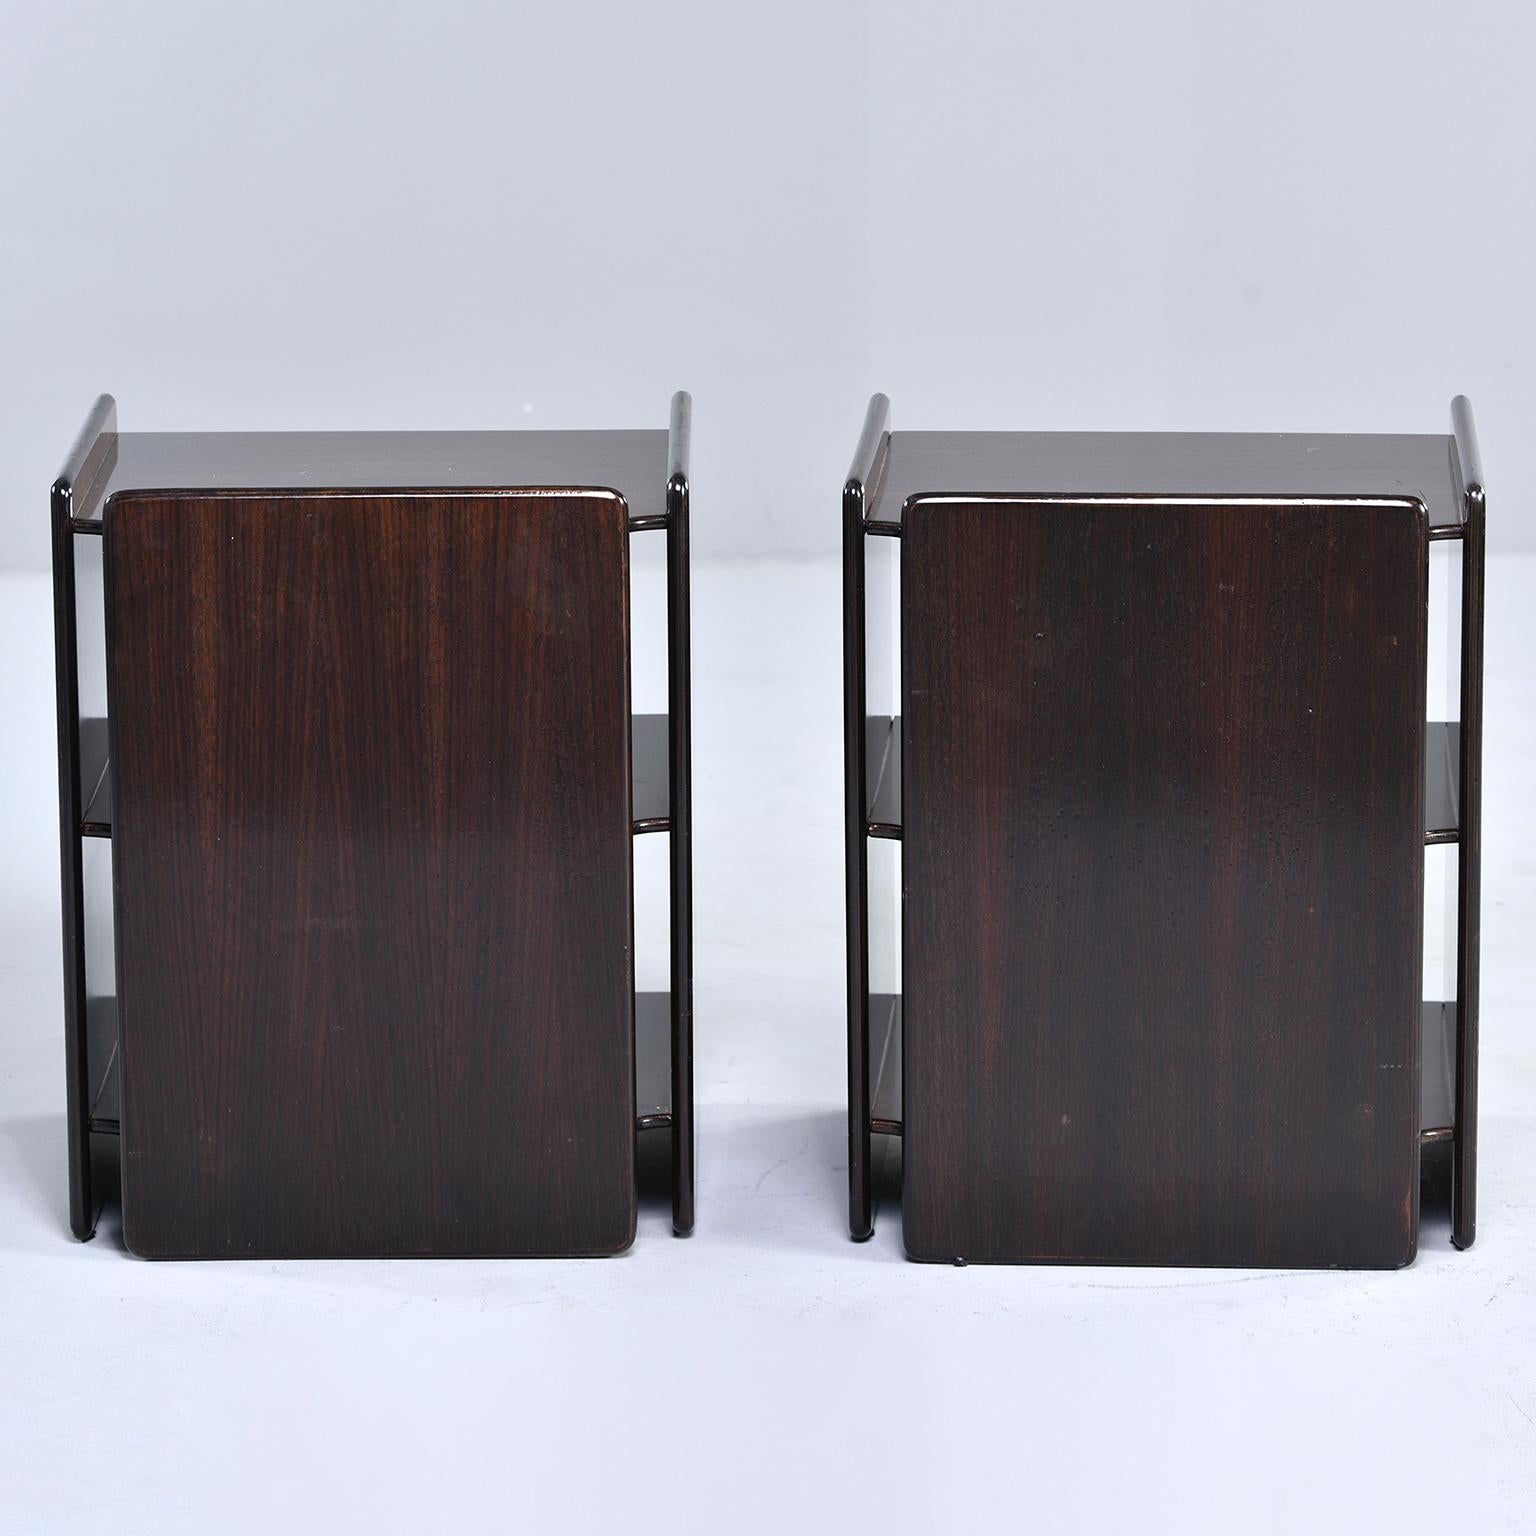 European Pair of Dark Walnut Side Tables with Two Open Shelves